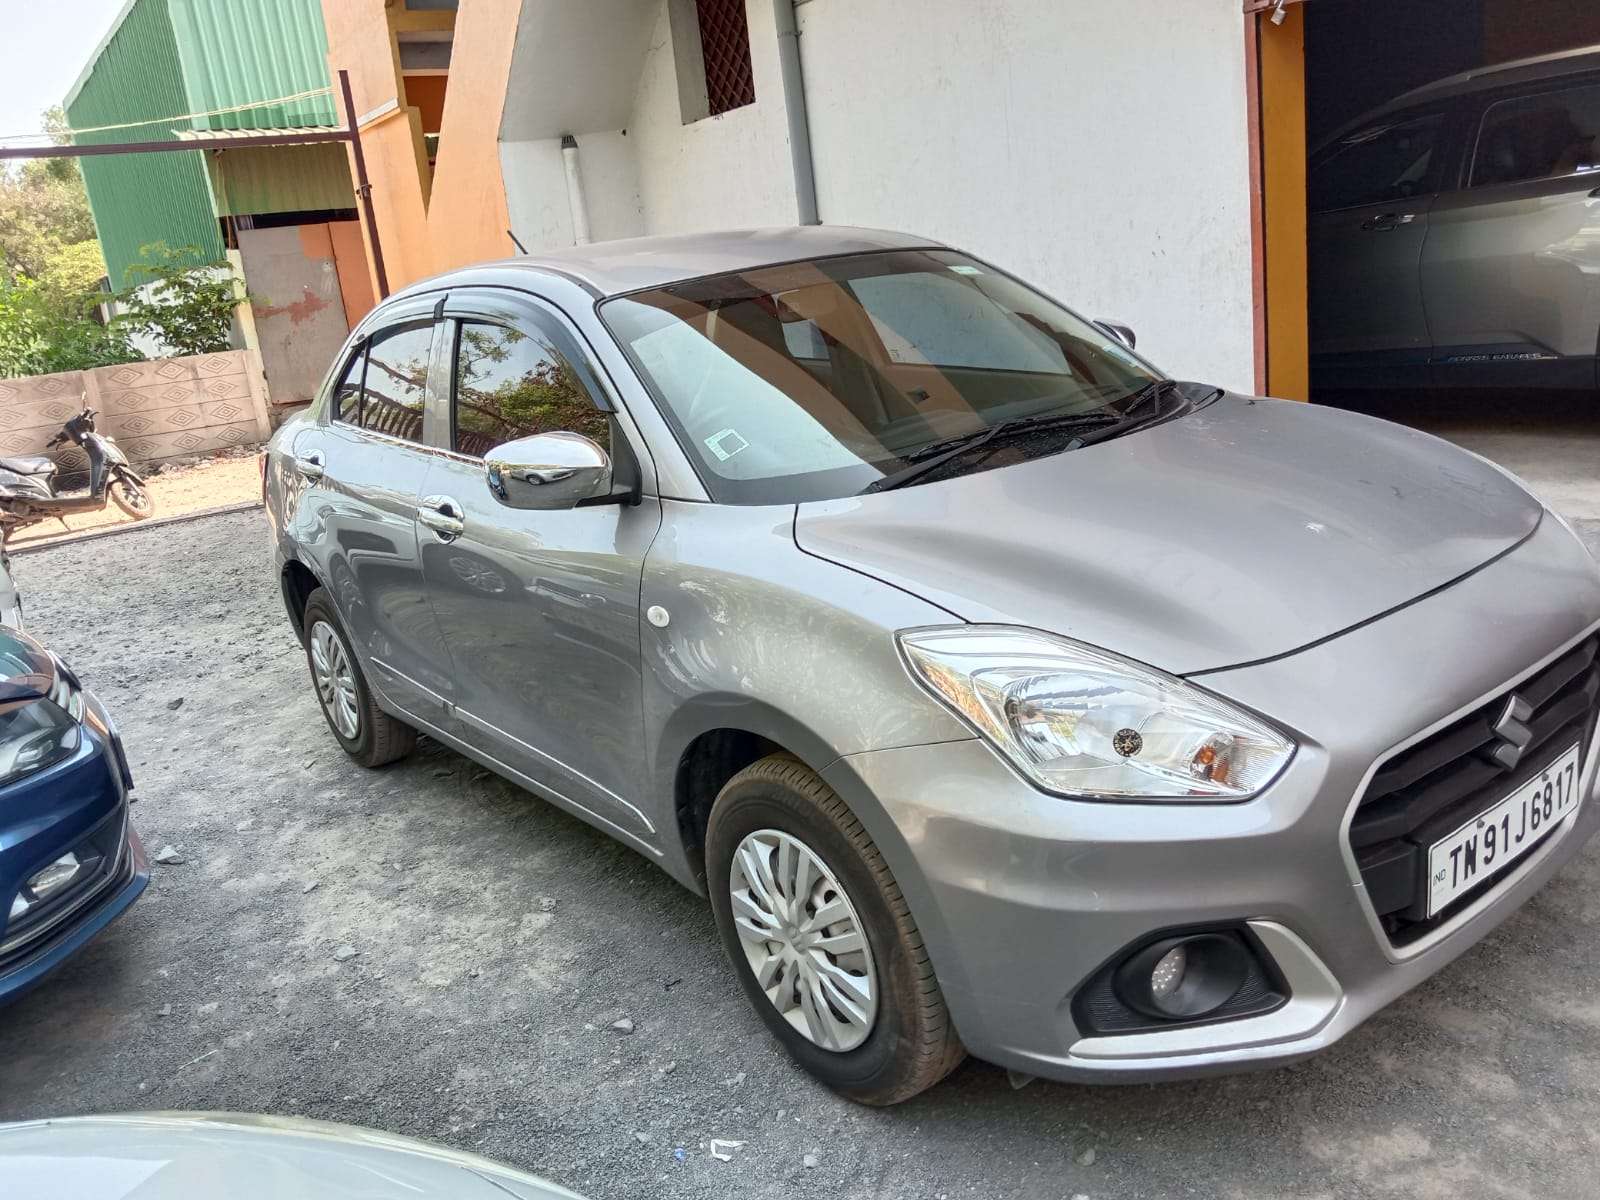 2811-for-sale-Maruthi-Suzuki-DZire-Petrol-First-Owner-2020-TN-registered-rs-630000